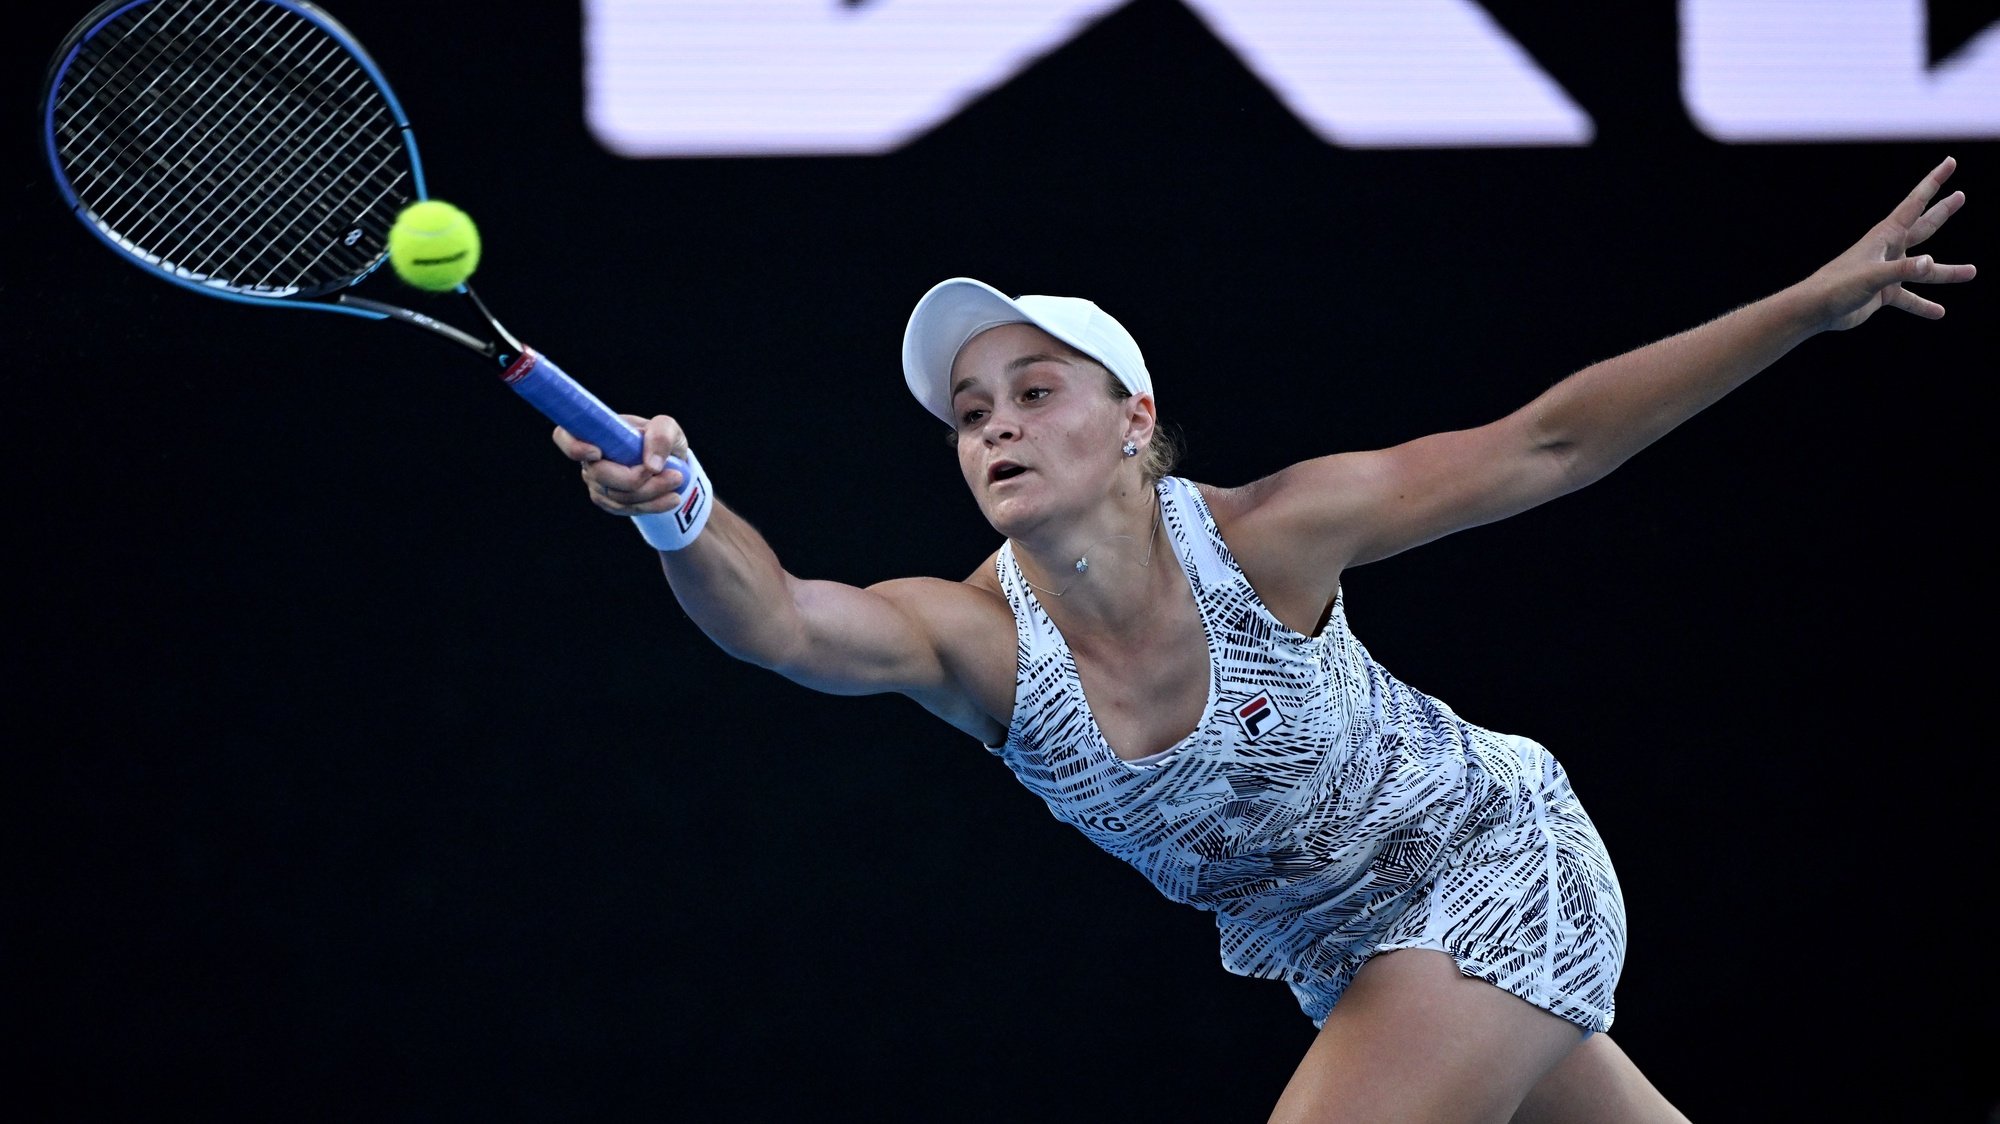 epa09707662 Ashleigh Barty of Australia plays a shot during her quarter final match against Jessica Pegula of the US at the Australian Open Grand Slam tennis tournament at Melbourne Park, in Melbourne, Australia, 25 January 2022.  EPA/DEAN LEWINS AUSTRALIA AND NEW ZEALAND OUT